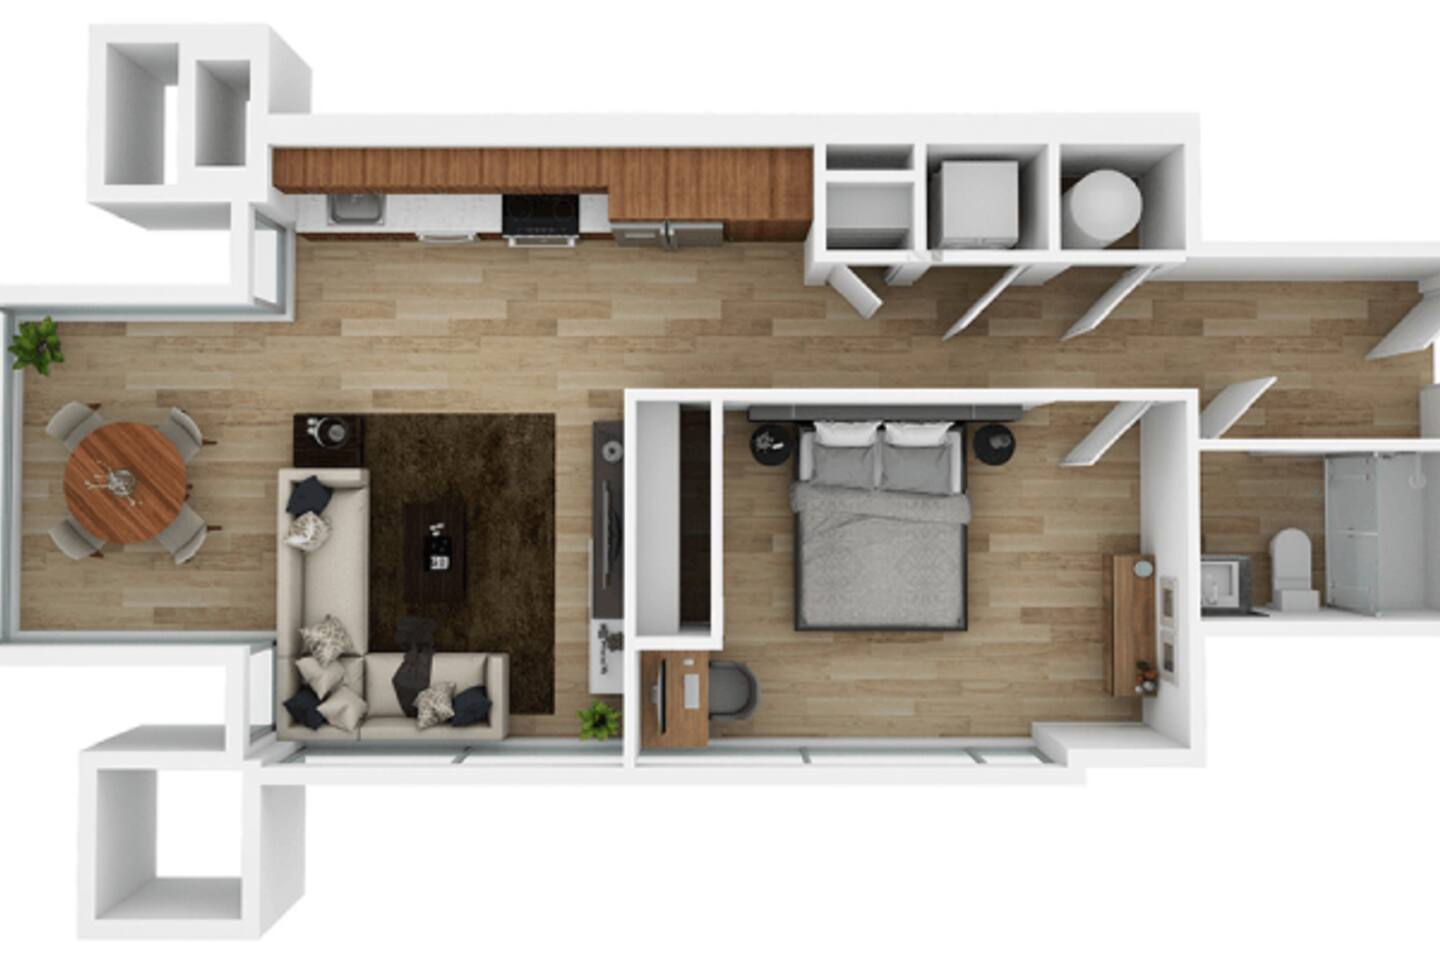 Floorplan diagram for A3A, showing 1 bedroom